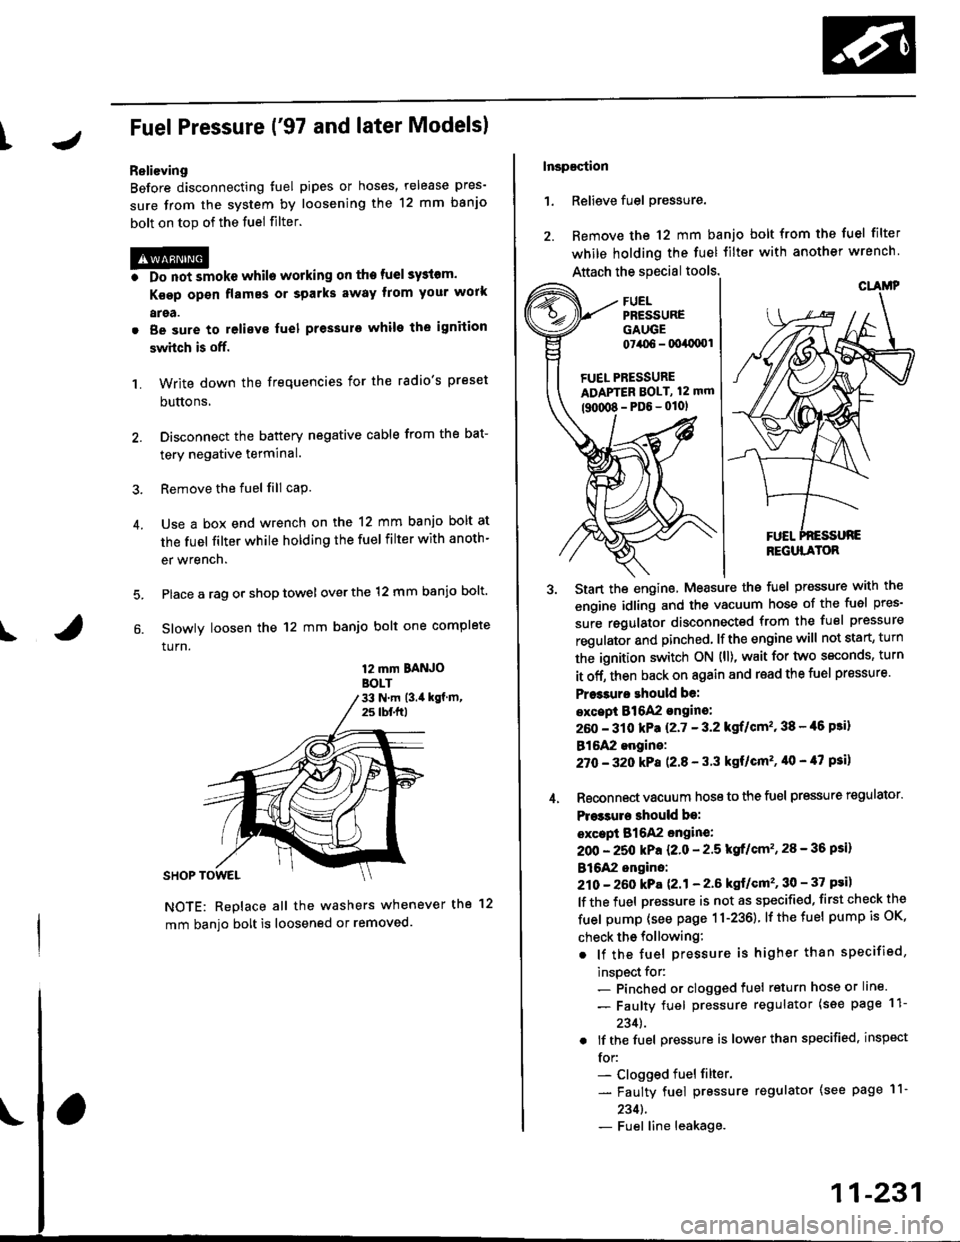 HONDA CIVIC 1998 6.G Workshop Manual tJFuel Pressure {97 and later Models)
ReliGving
Before disconnecting tuel pipes or hoses, release pres-
sure from the system by loosening the 12 mm banjo
bolt on top of the fuel filter.
@o Do not smo